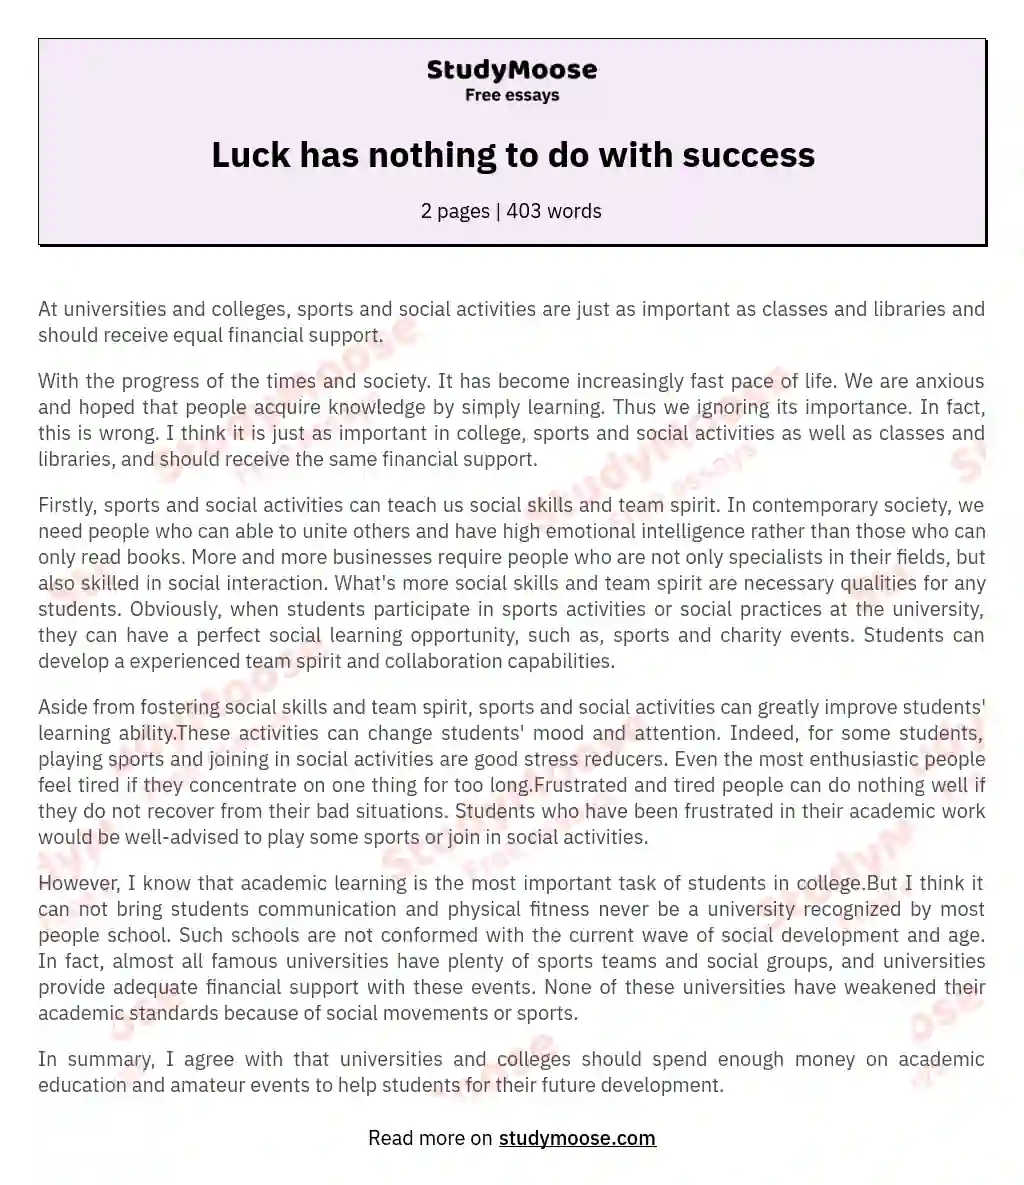 Luck has nothing to do with success essay